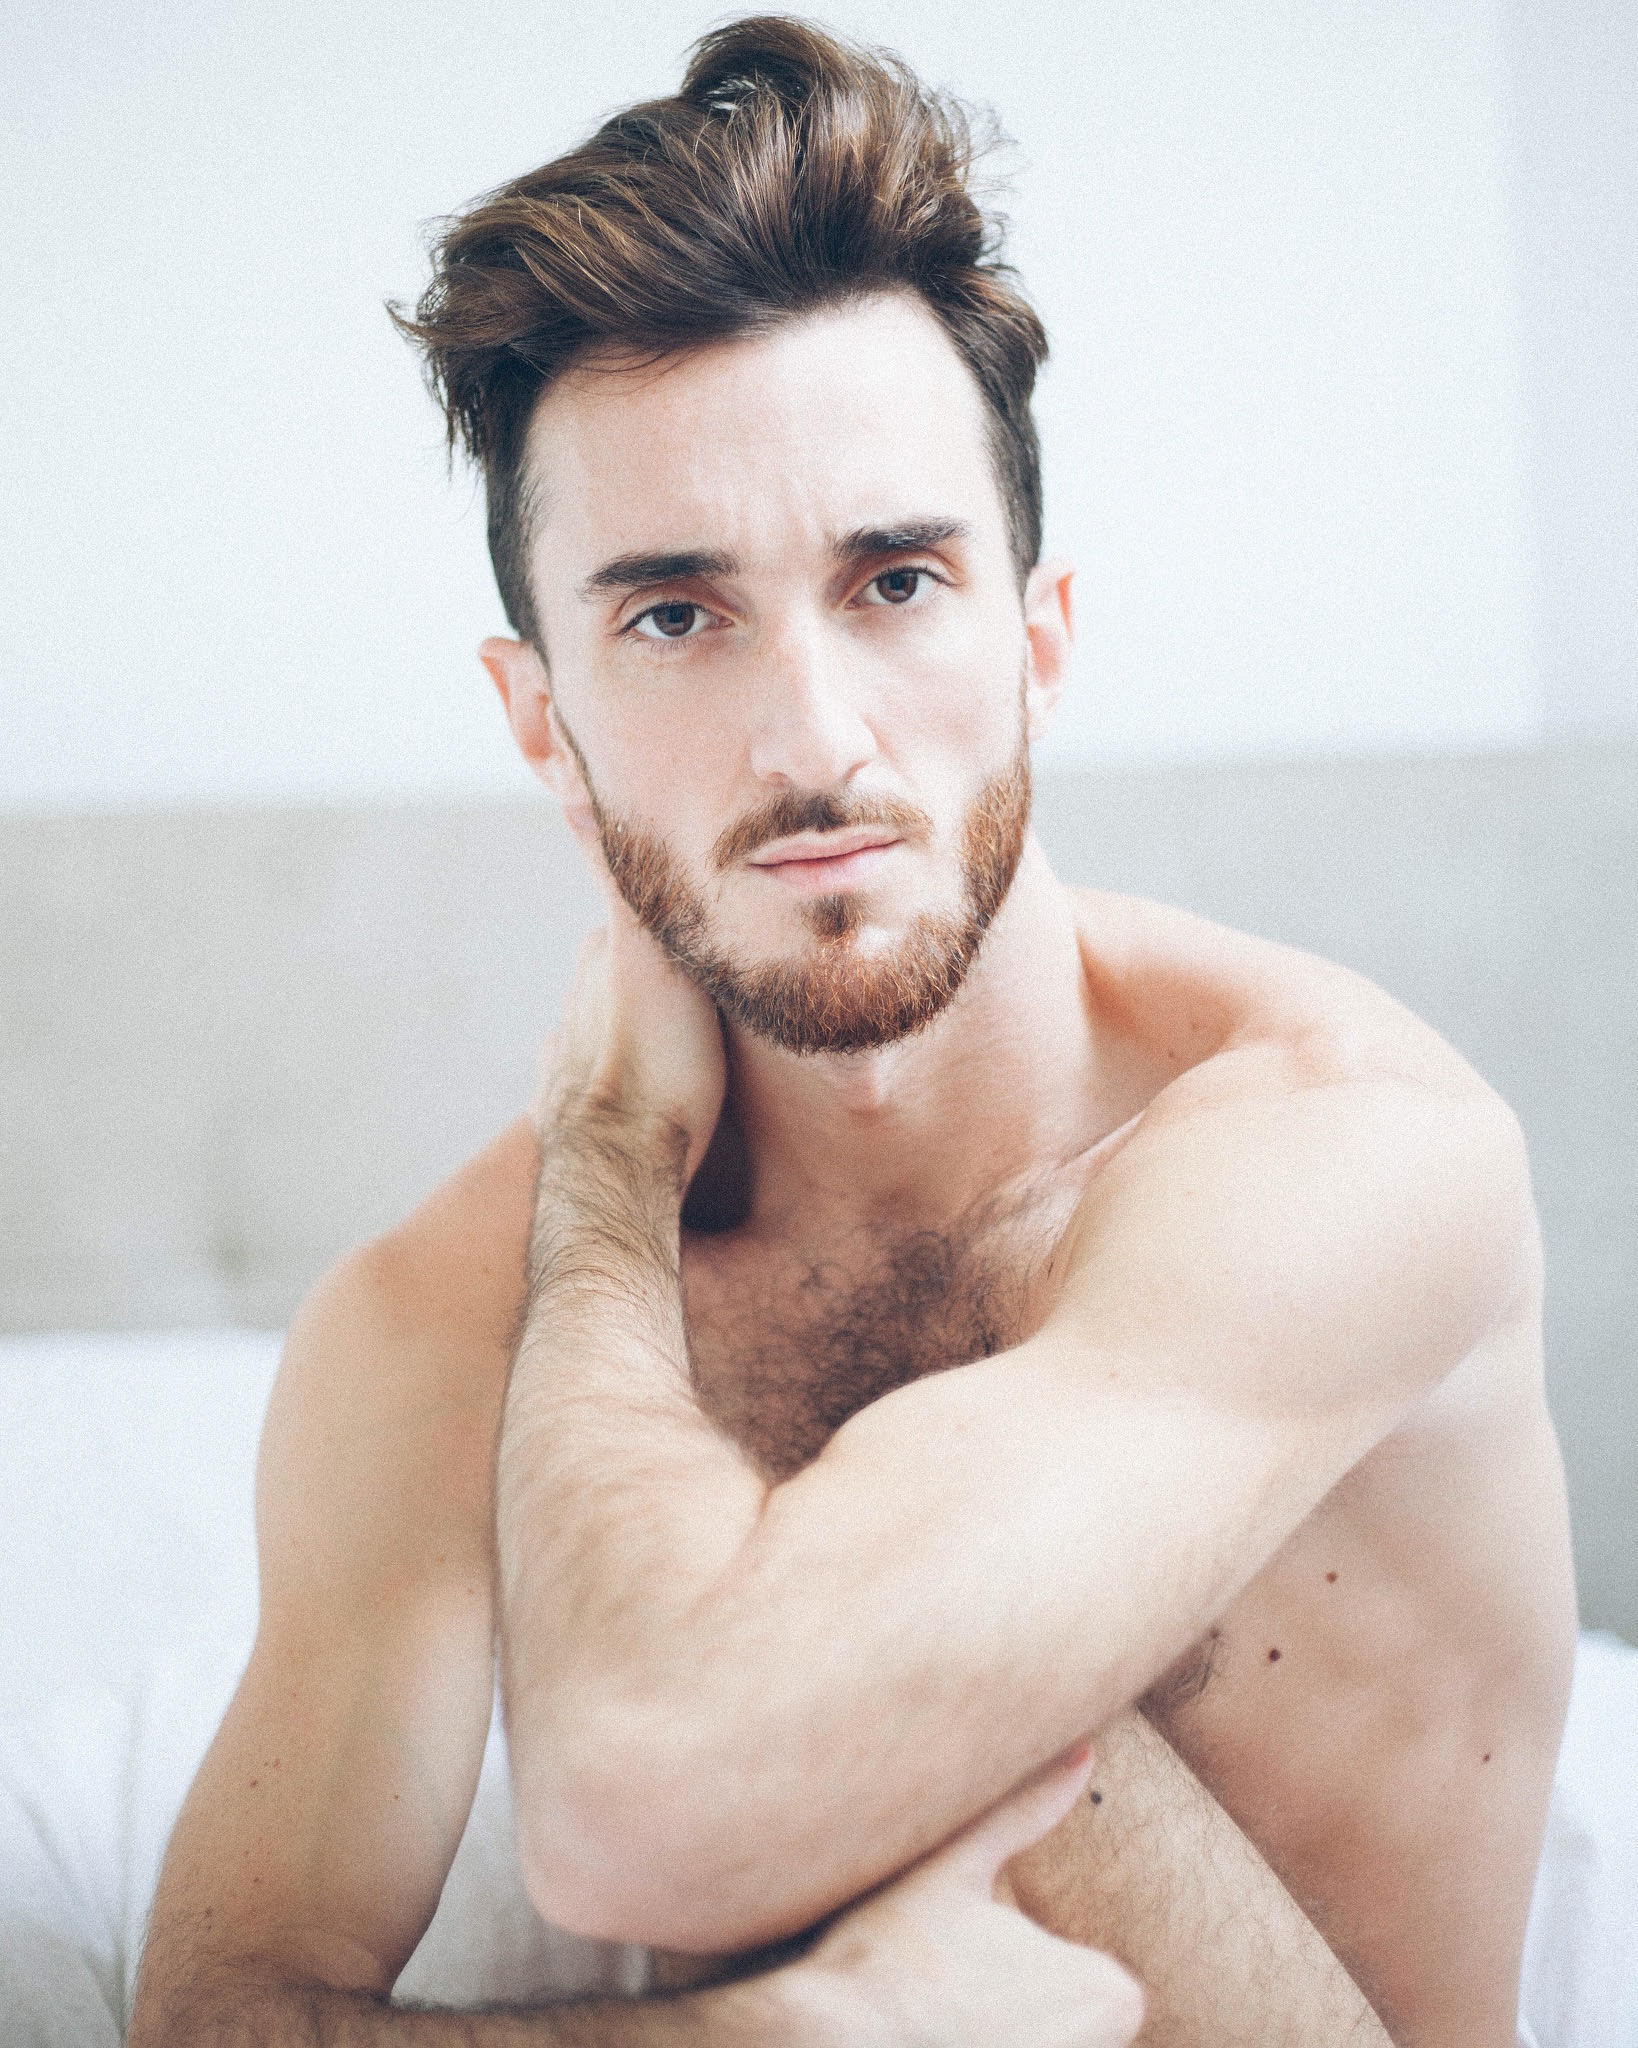 Sam Morris wants to be the Instagram boyfriend of your fantasies.